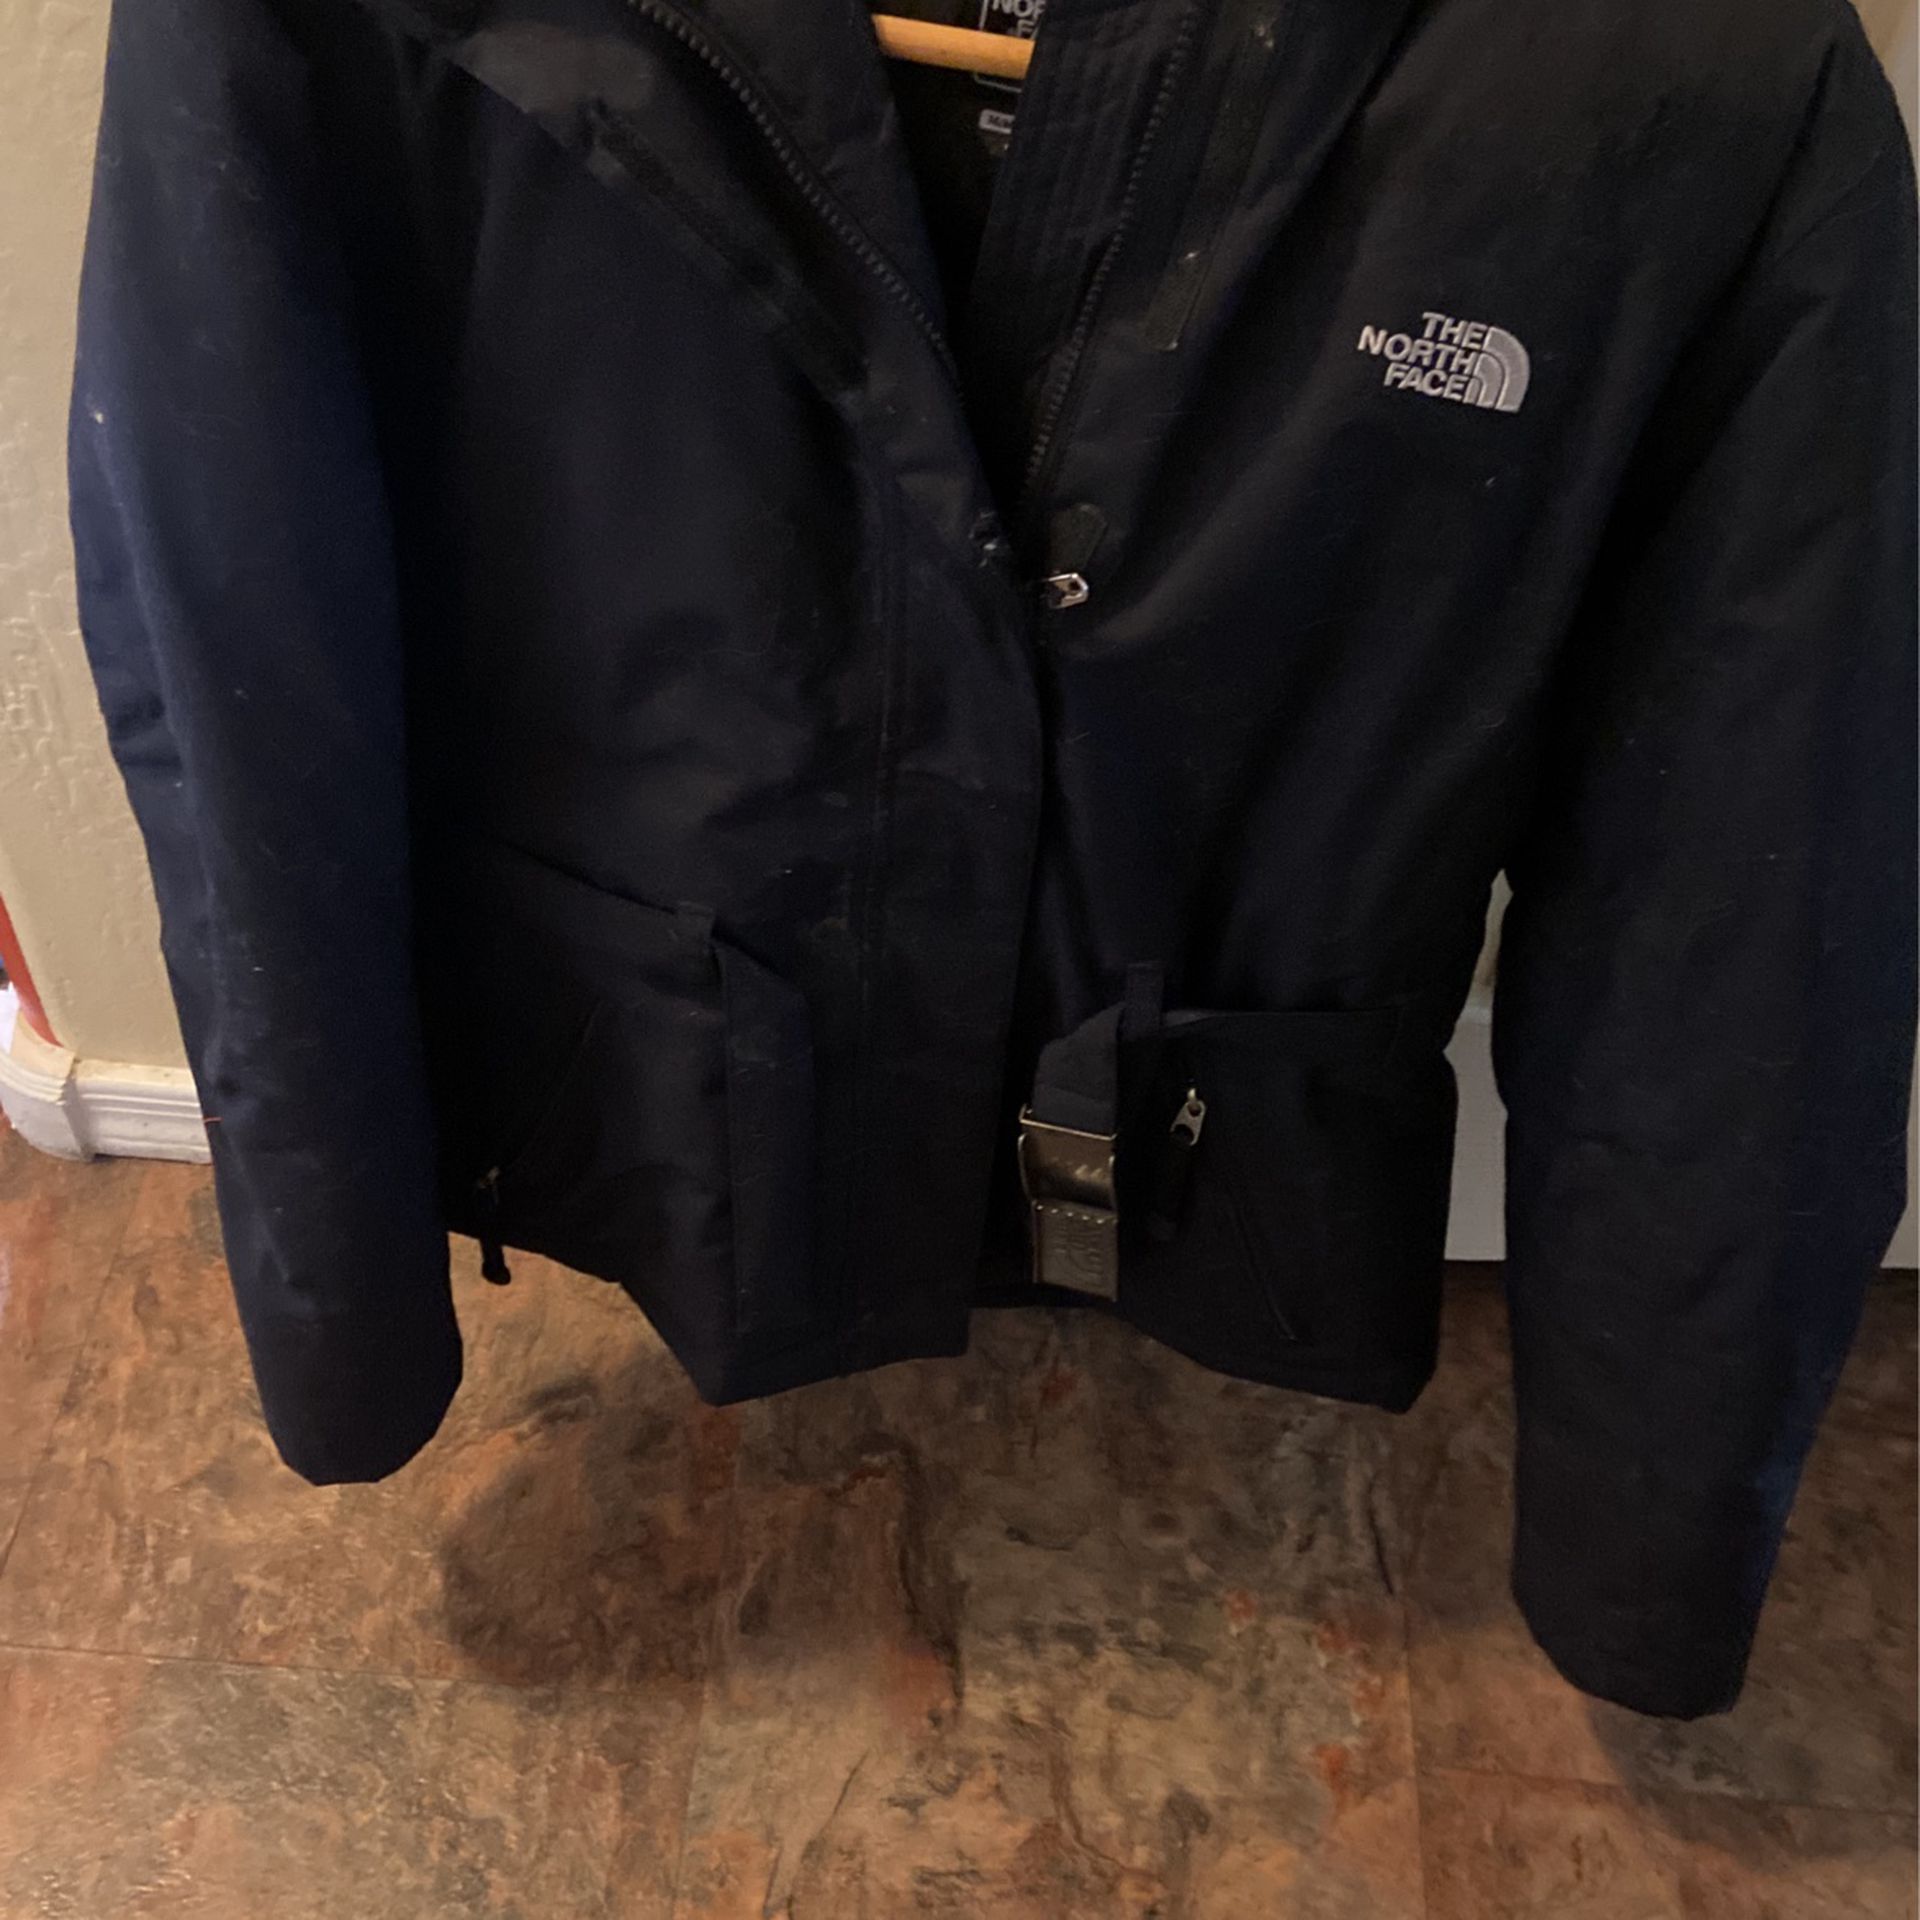 North Face Woman’s Jacket